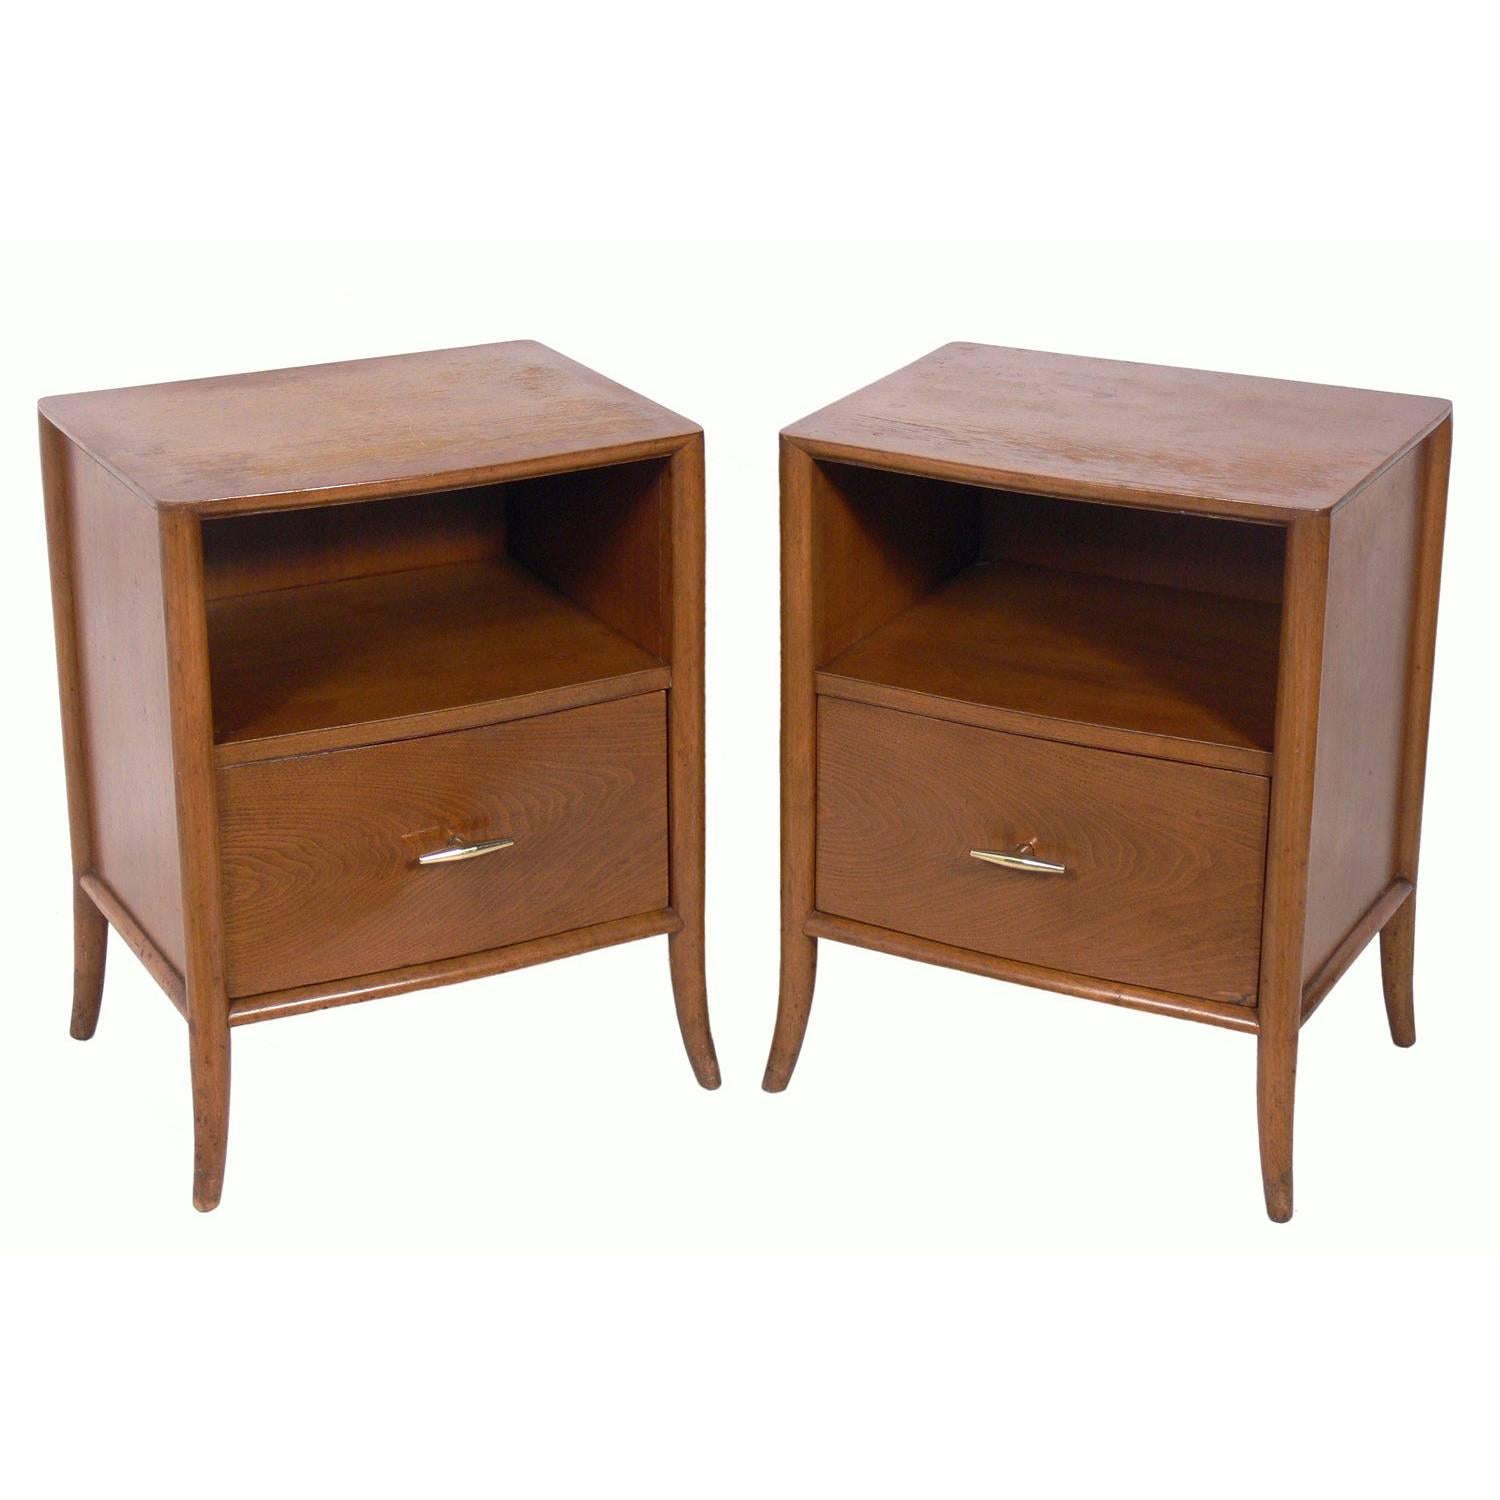 Pair of Walnut and Brass Nightstands by T.H. Robsjohn-Gibbings